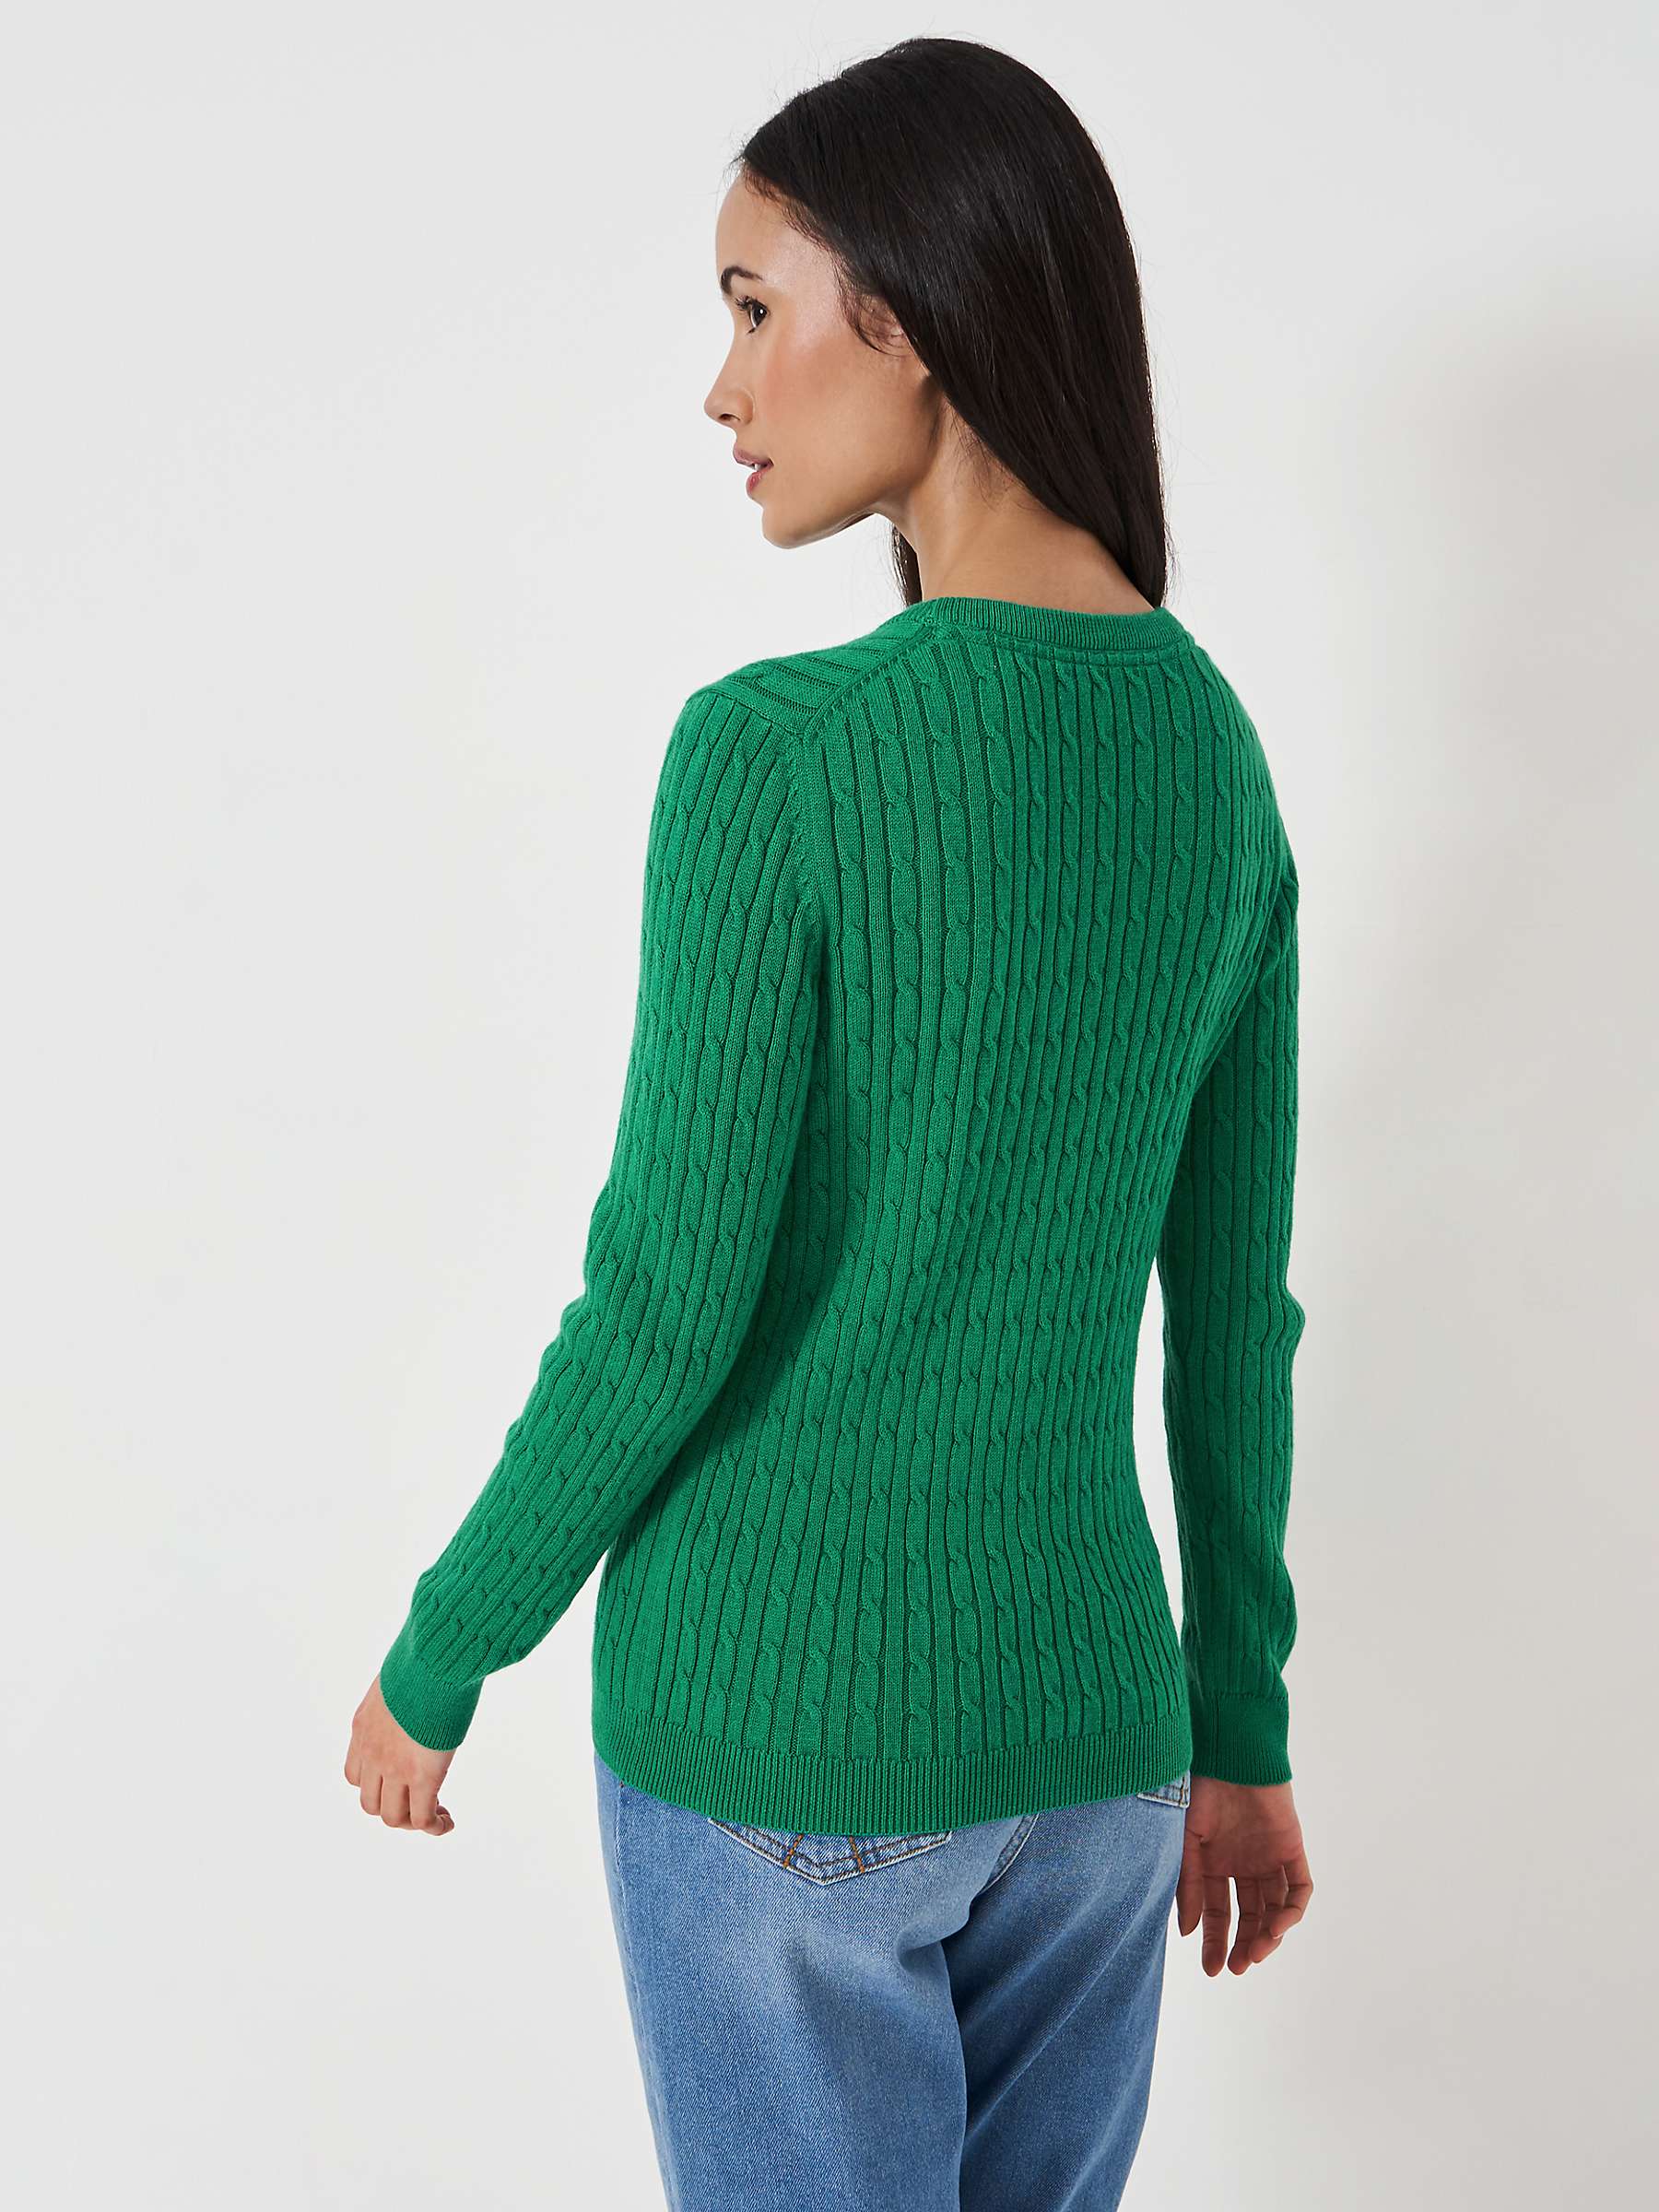 Buy Crew Clothing Heritage Crew Neck Cable Knit Jumper Online at johnlewis.com